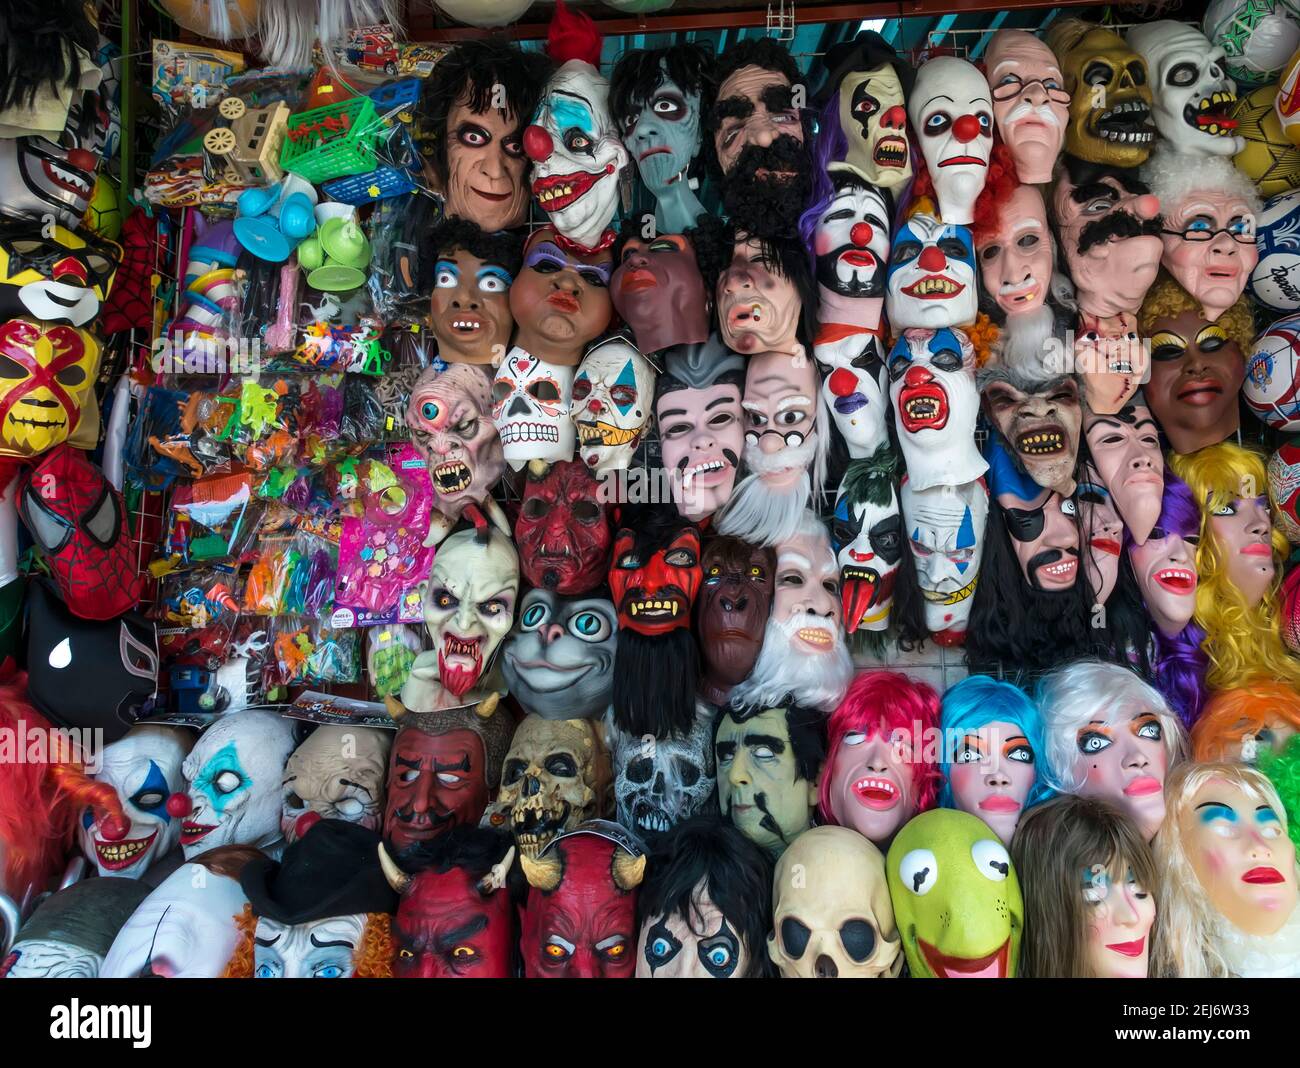 Rubber masks on sale in Mexico Stock Photo